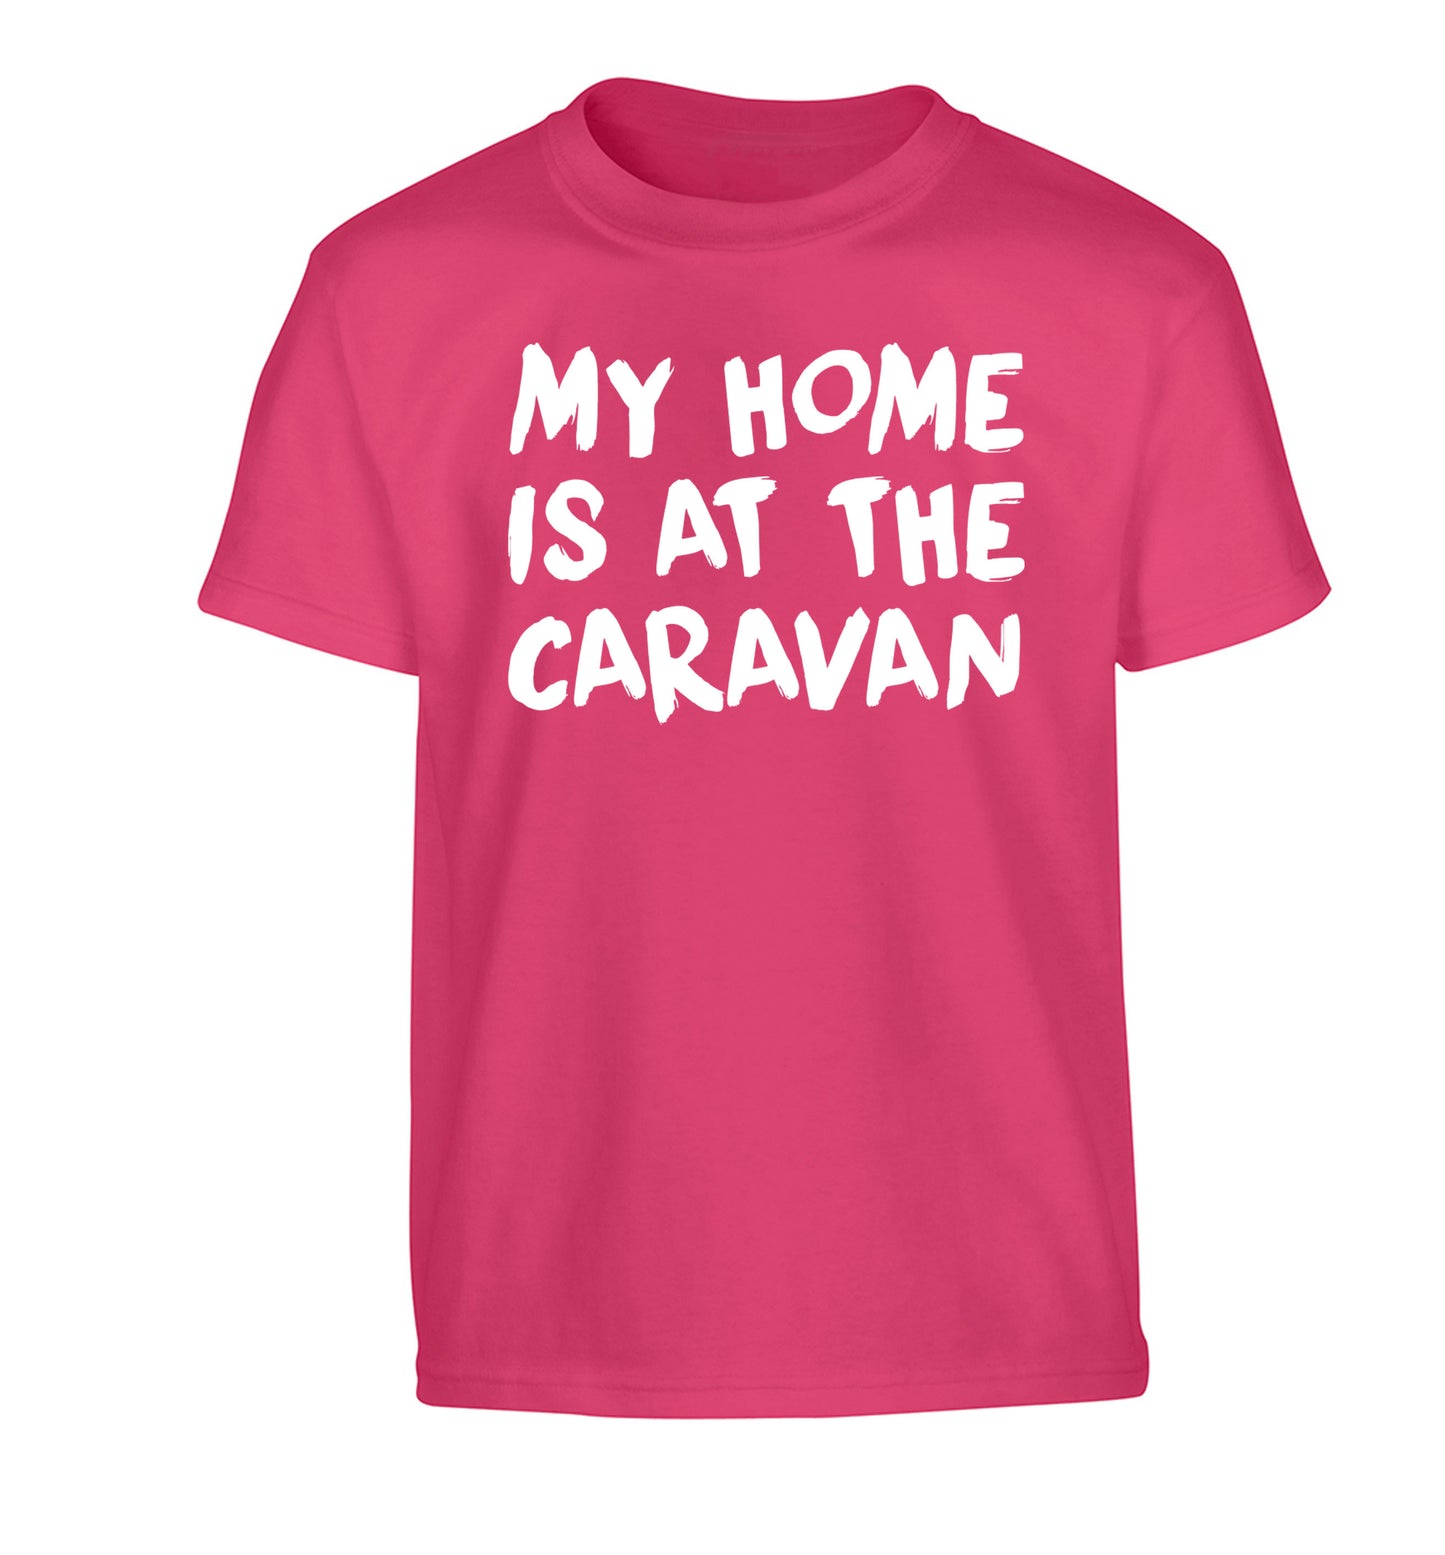 My home is at the caravan Children's pink Tshirt 12-14 Years